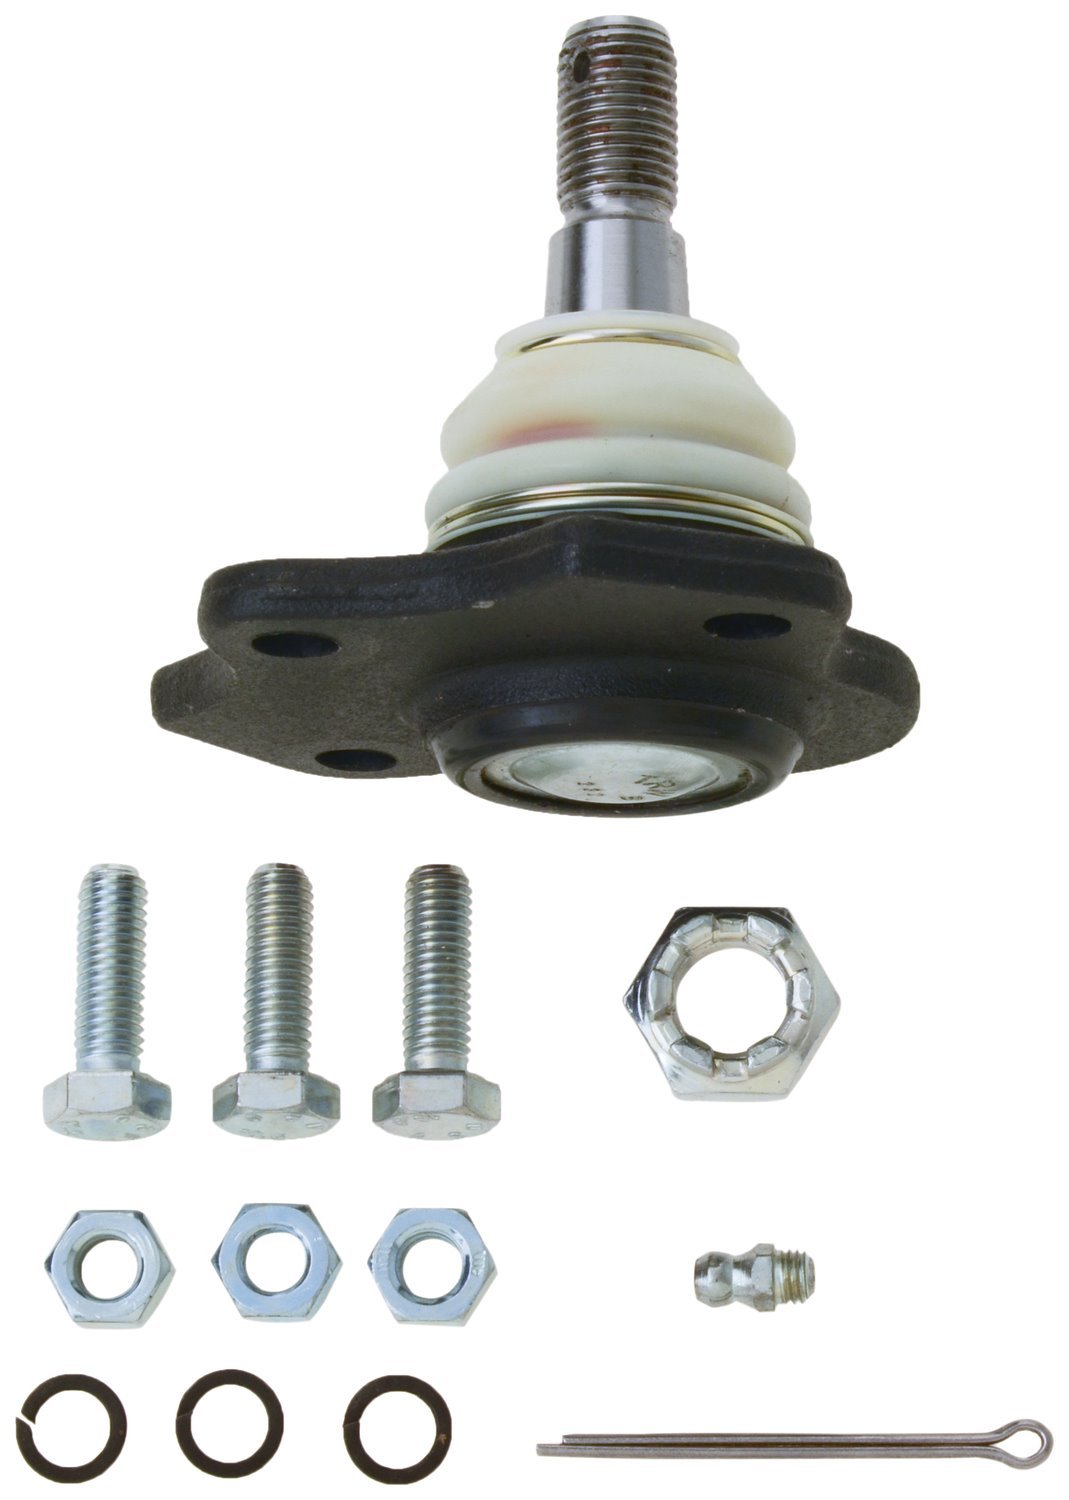 JBJ866 Ball Joint Fits Select Ford Models, Position: Left/Driver or Right/Passenger, Front Upper